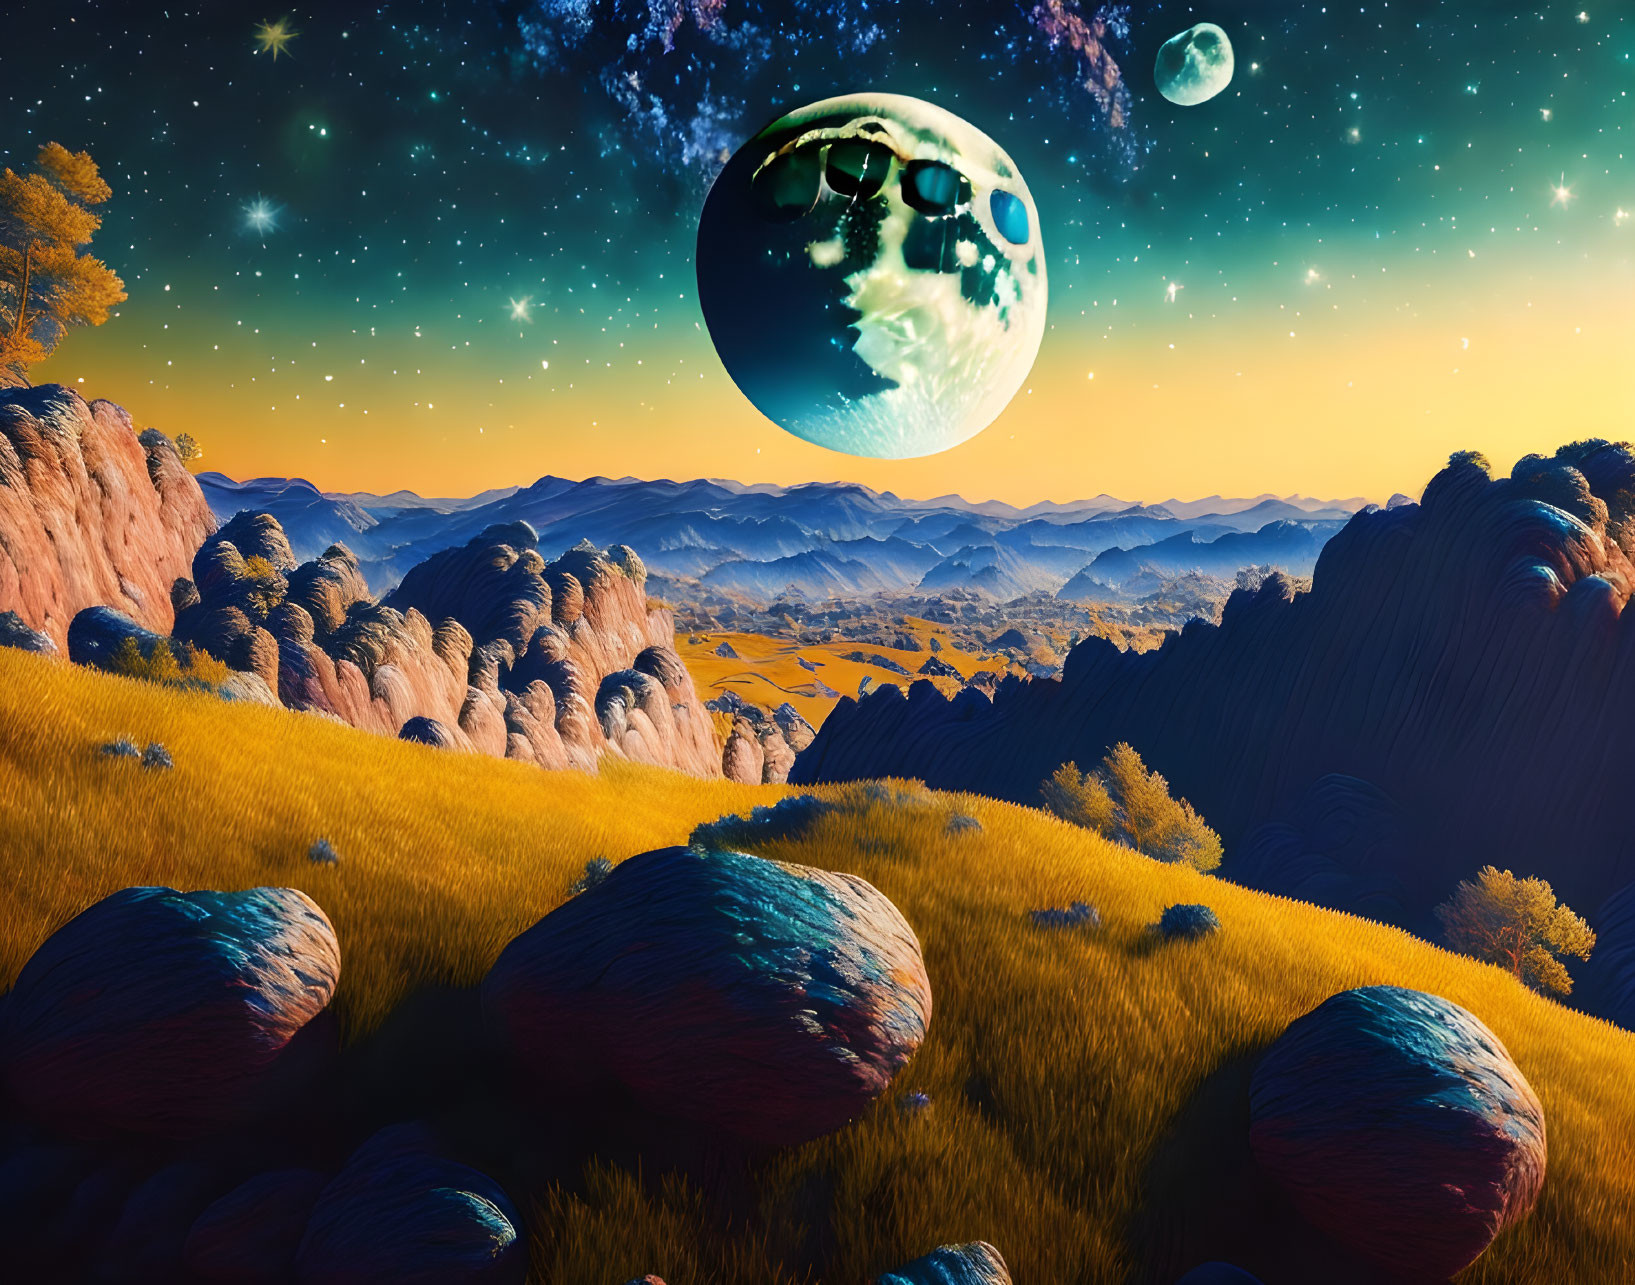 Fantastical landscape with yellow grass hills, boulders, surreal sky